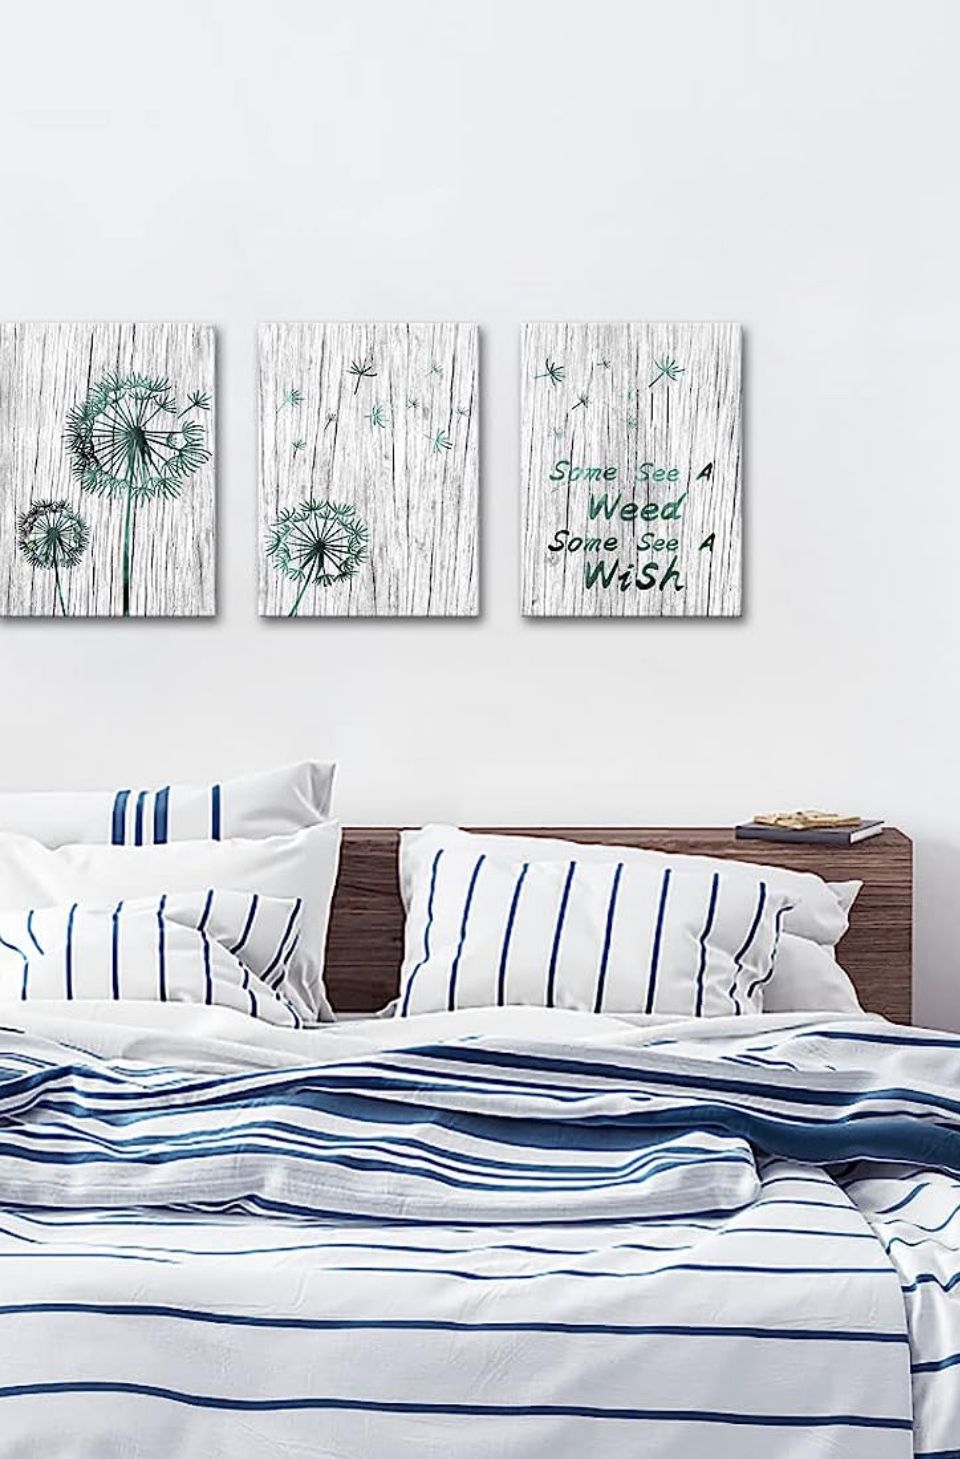 3 Pieces Rustic Bathroom Wall Decor Some See a Weed Some See a Wish Abstract Dandelion Inspirational Quote Artwork for Bedroom Home Decor